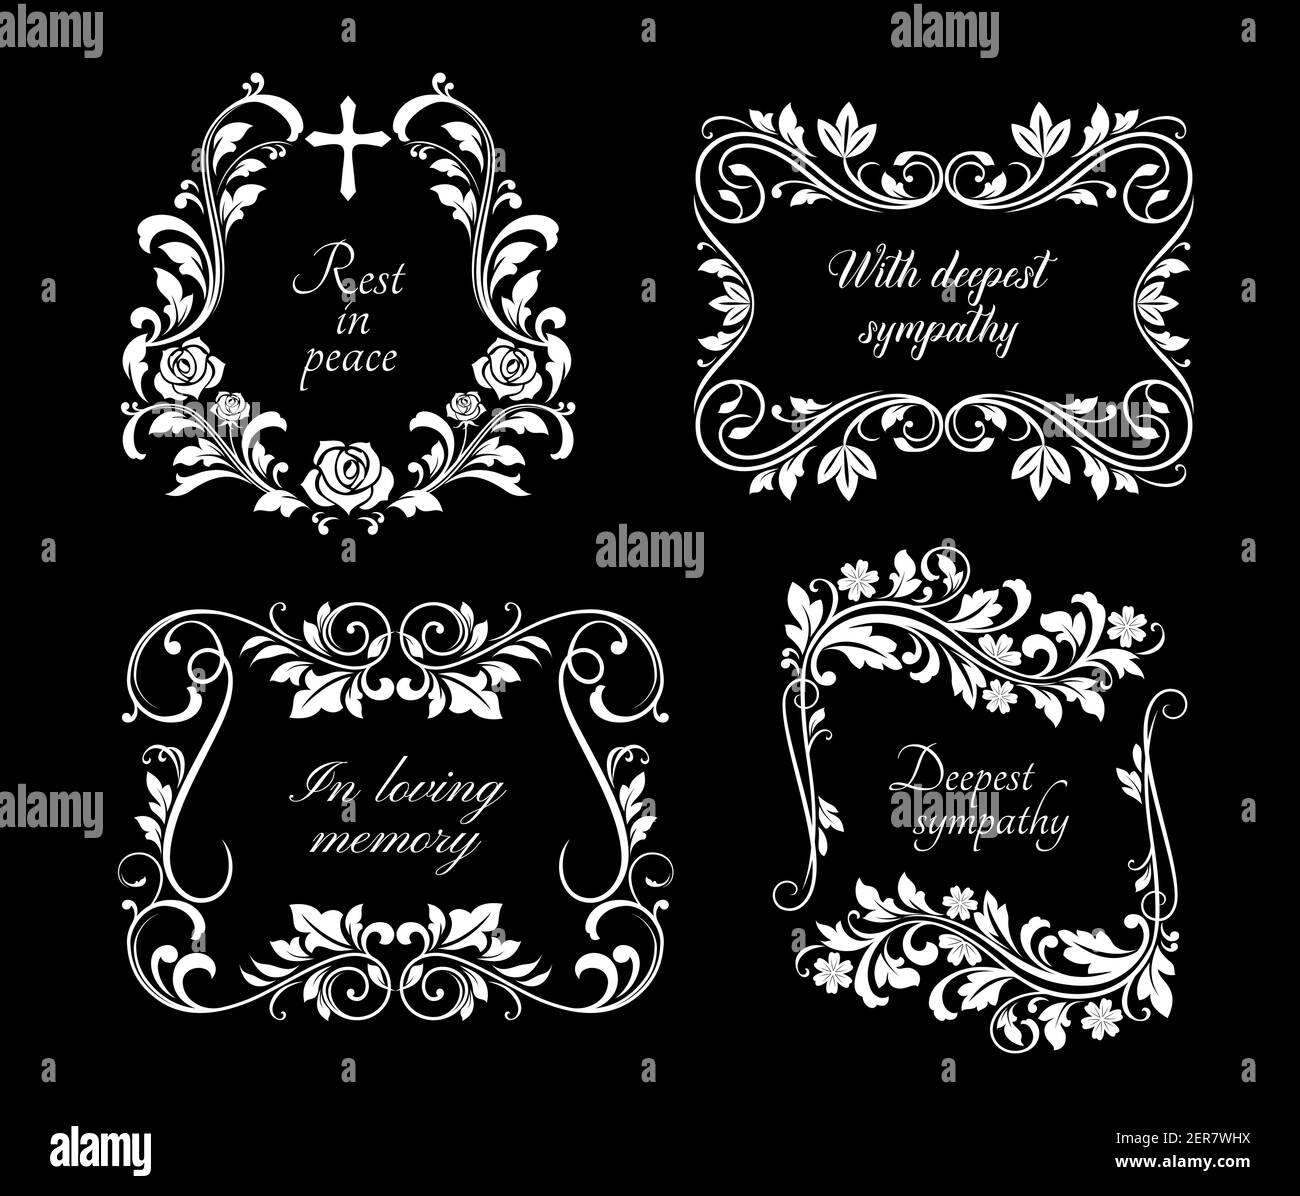 Funeral memorial frames with floral ornaments. Funerary card decoration border with roses and violets flowers, leaves on stem engraved vector. Mournin Stock Vector